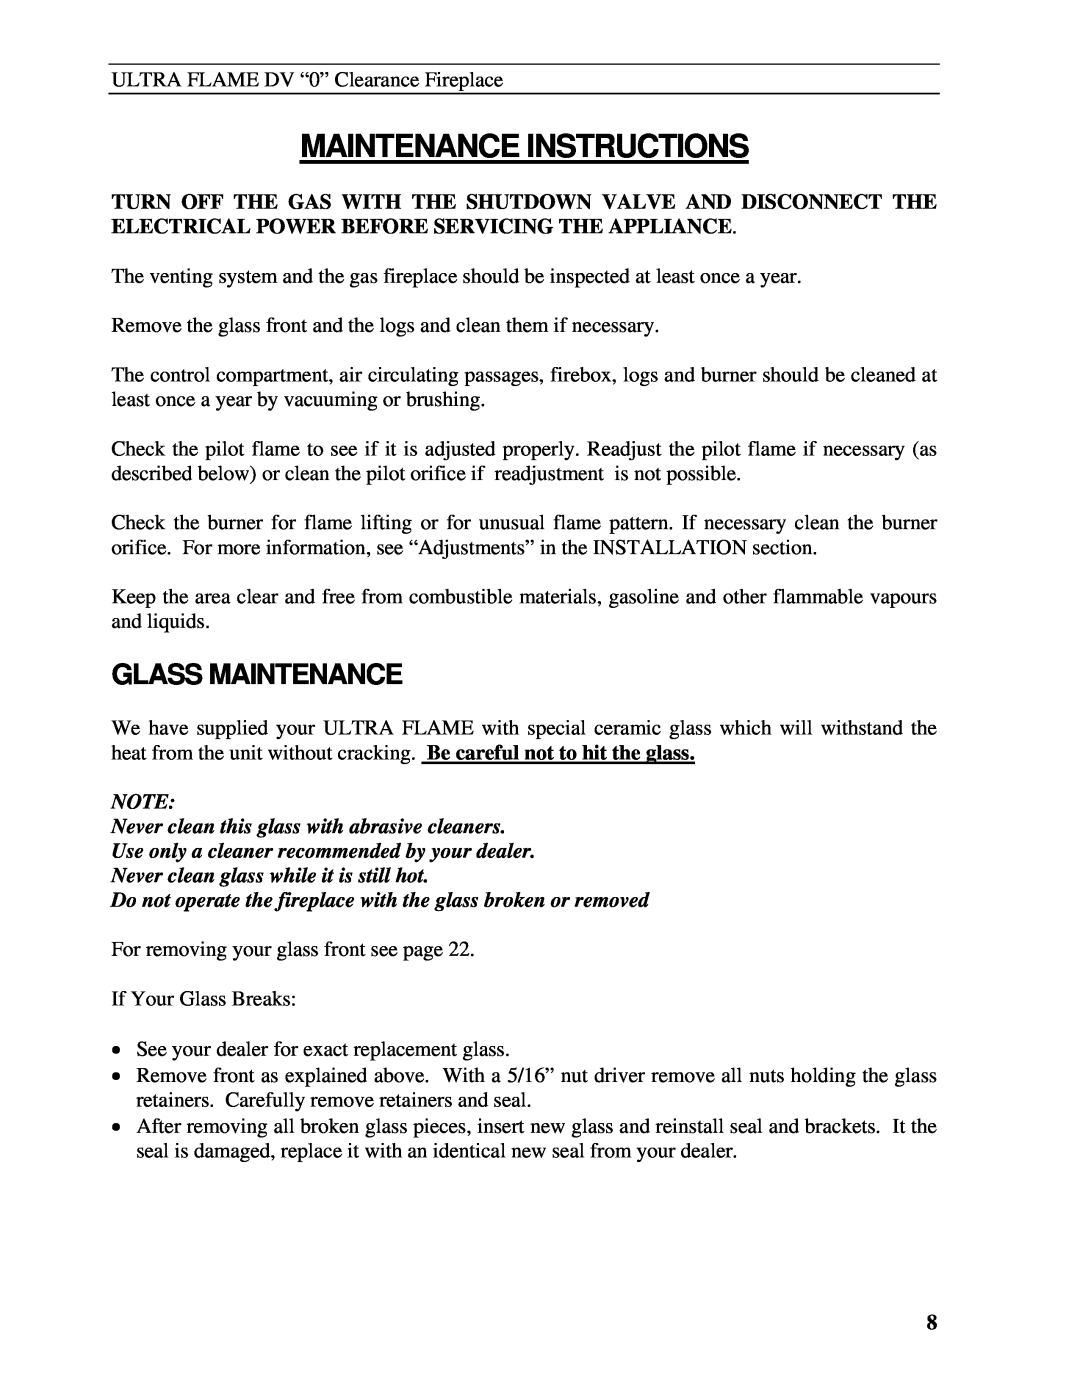 Drolet DG05437/DG05447 manual Maintenance Instructions, Glass Maintenance, Never clean this glass with abrasive cleaners 